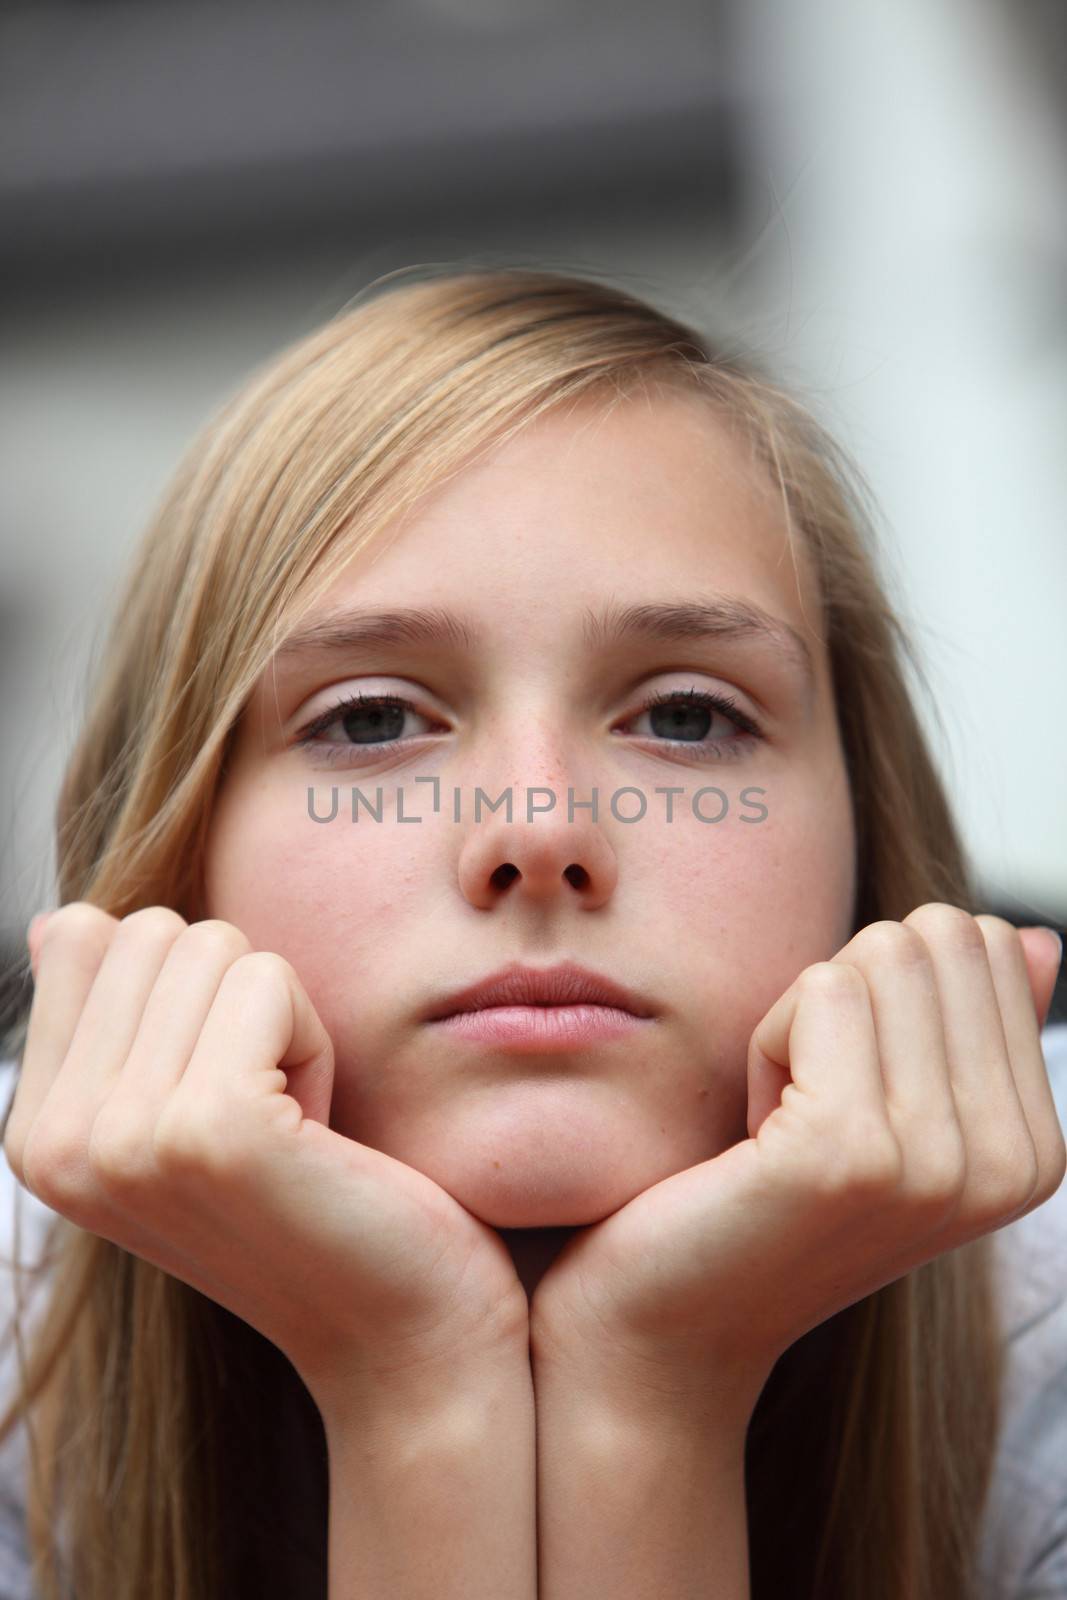 Bored young teenage girl staring at the camera with her chin resting on the palms of her hands